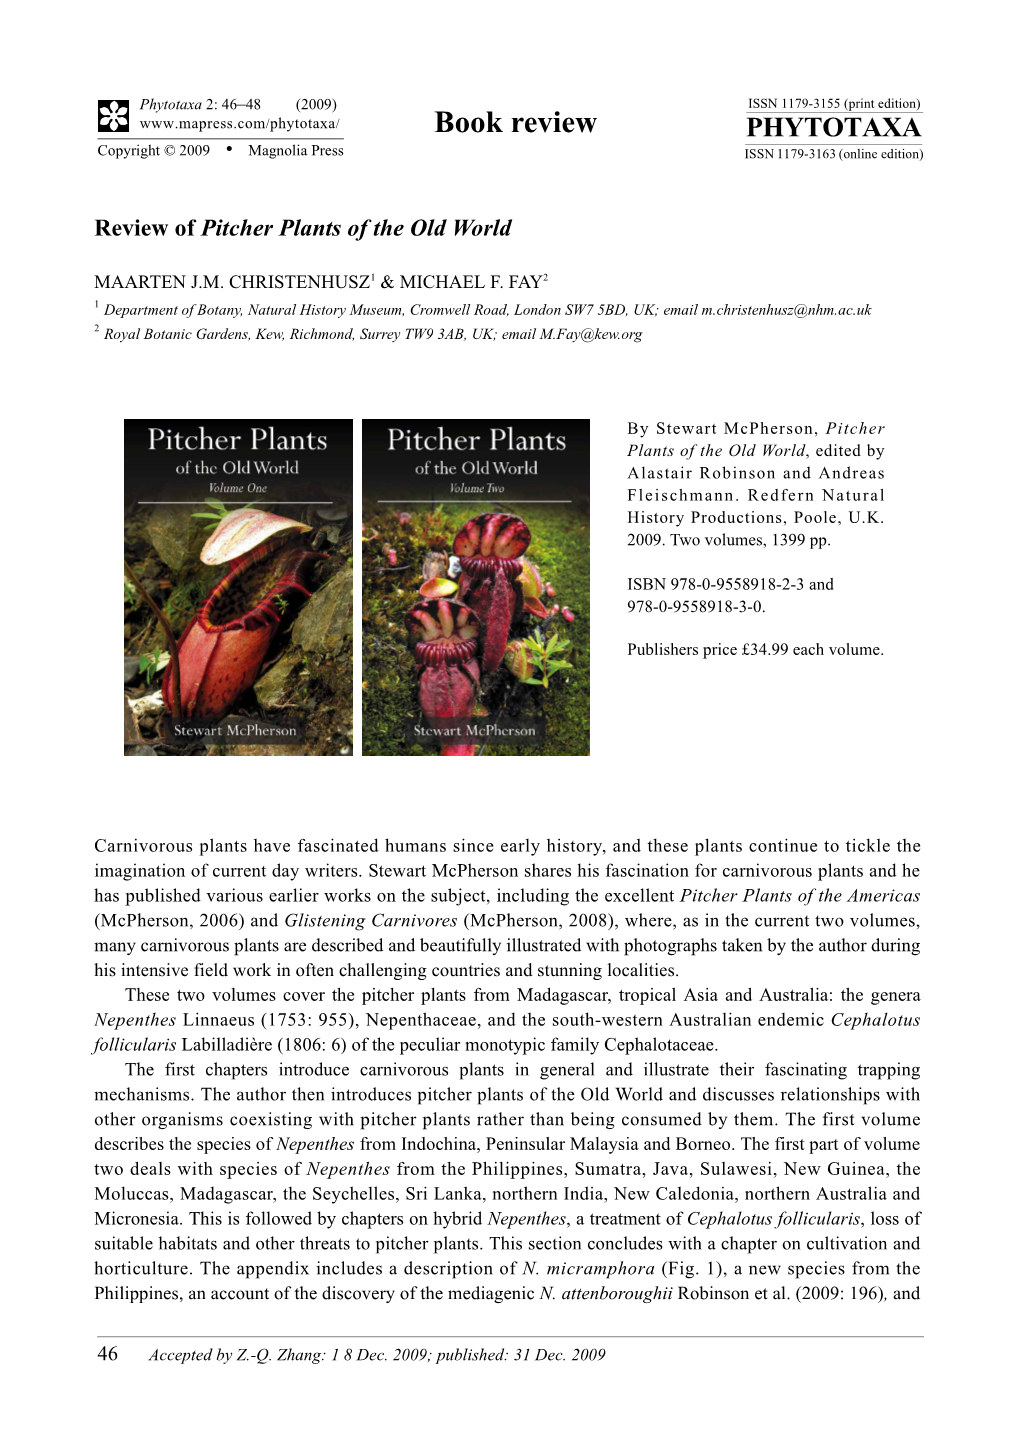 Phytotaxa 2: 46–48 (2009) Review of Pitcher Plants of the Old World